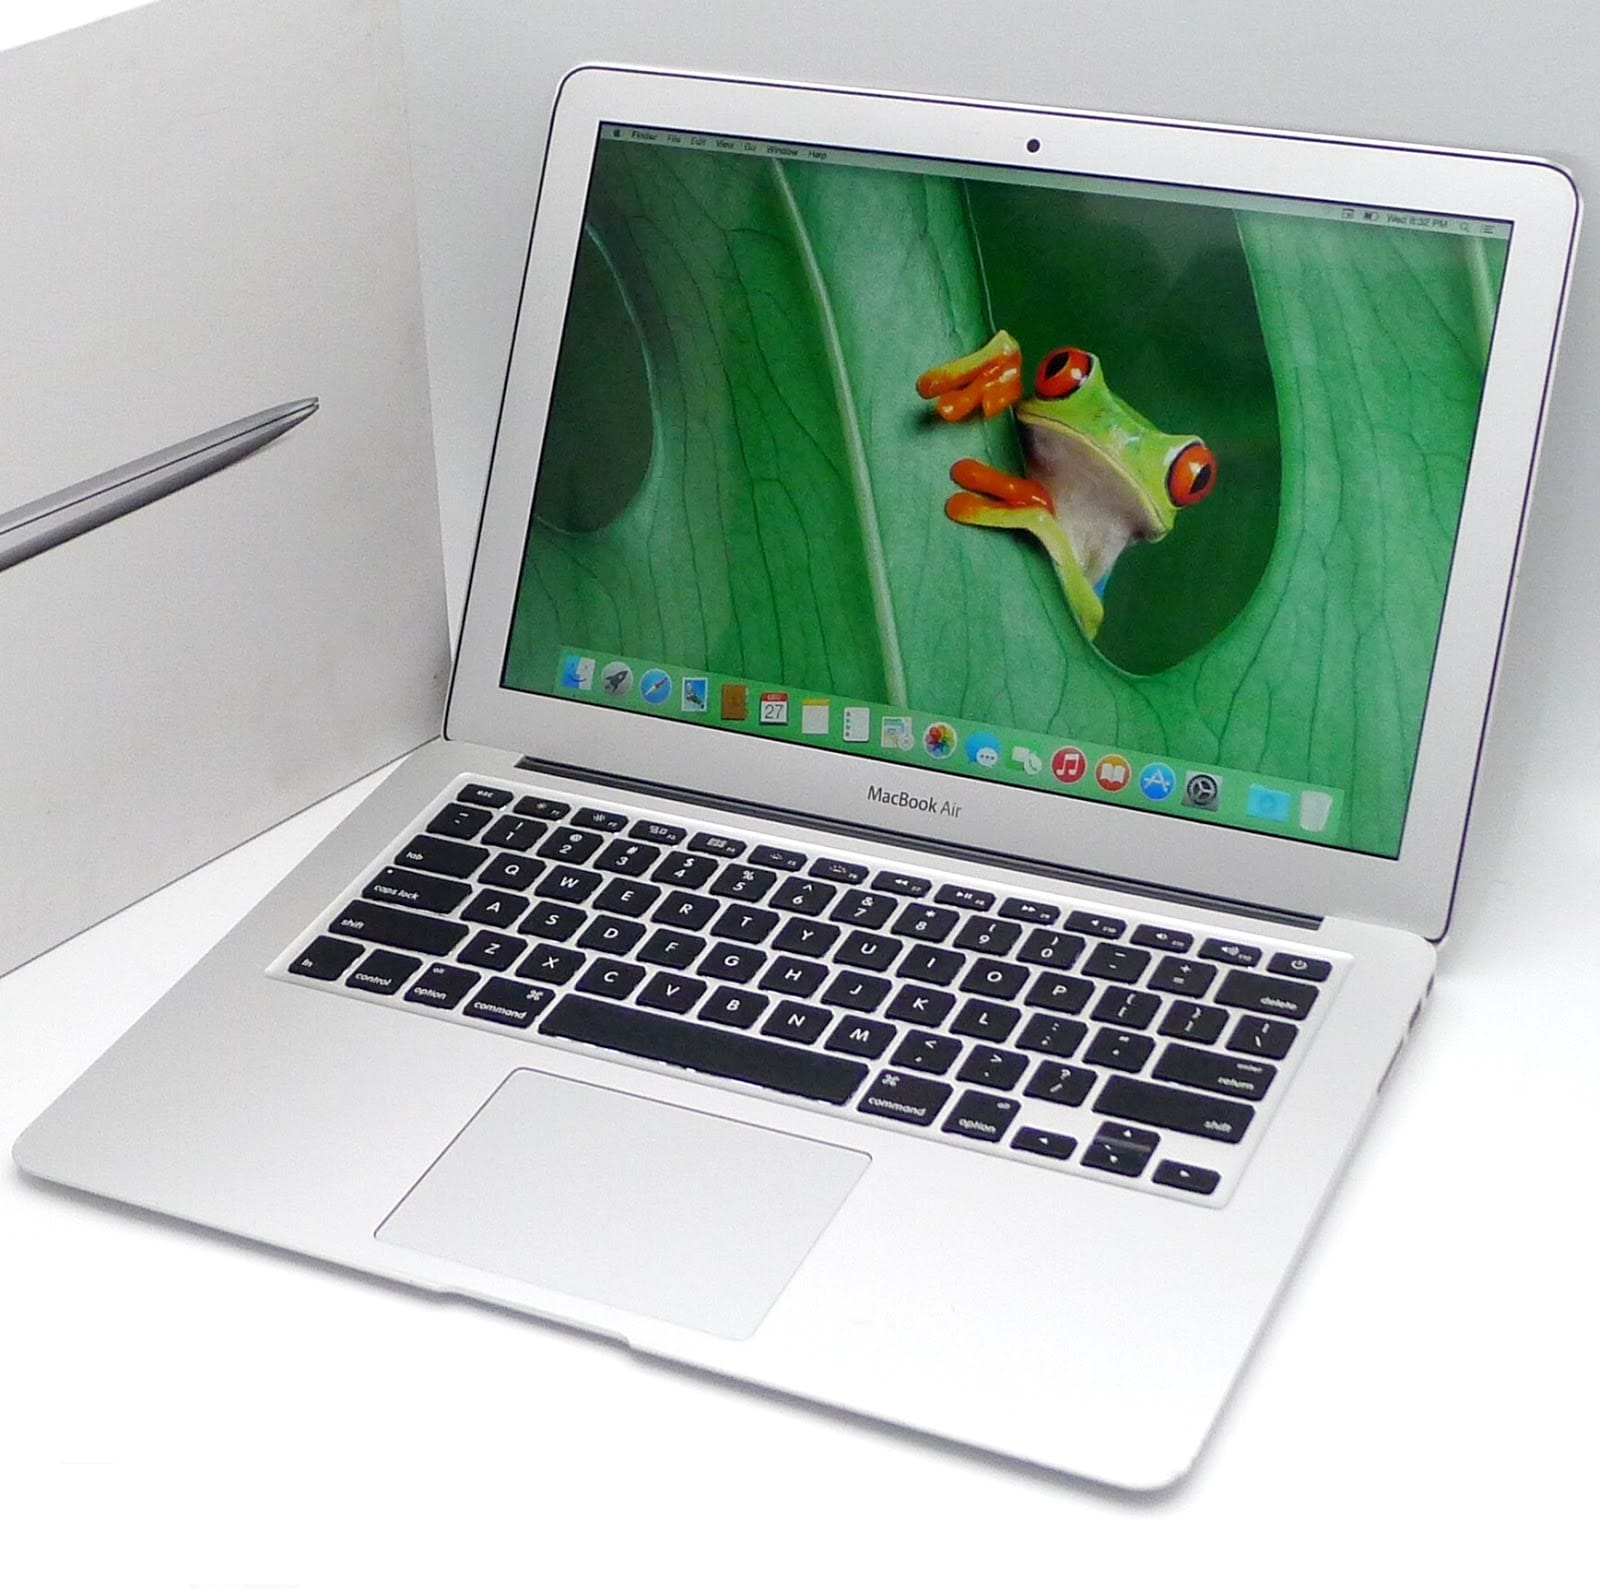 MacBook Air 13 inch Mid 2012 Technical Specifications